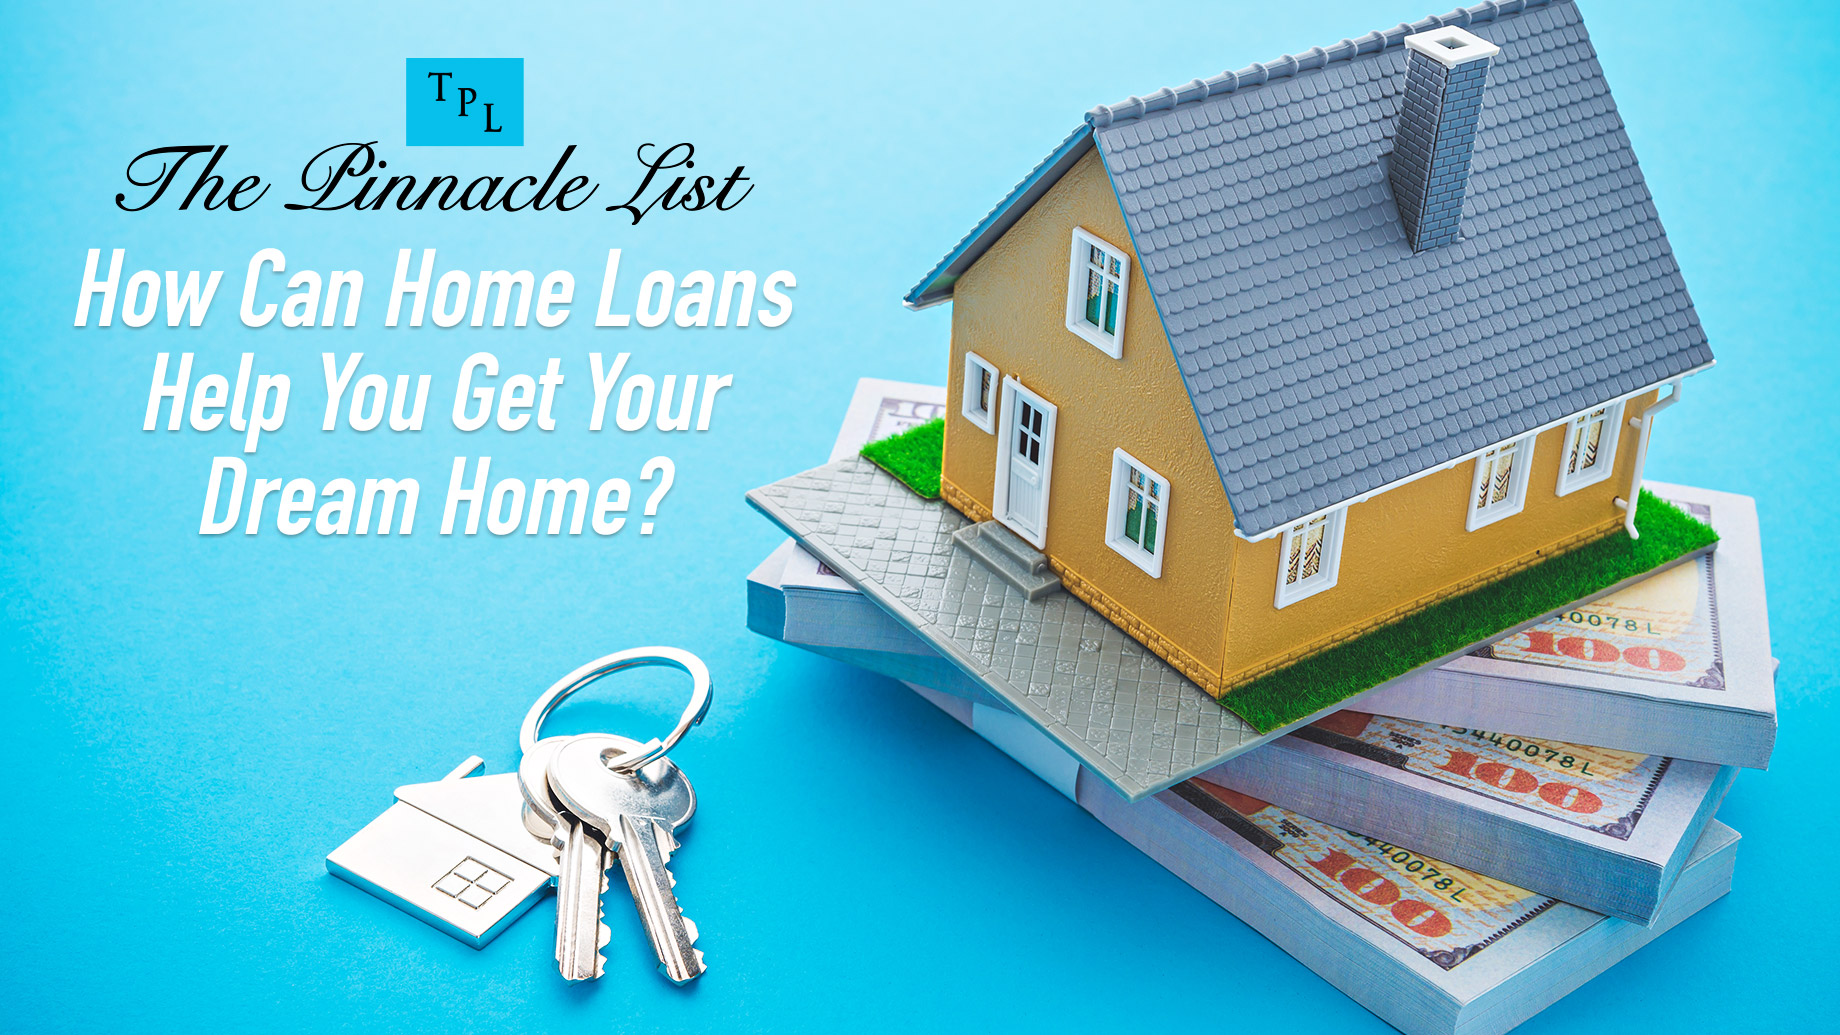 How Can Home Loans Help You Get Your Dream Home?